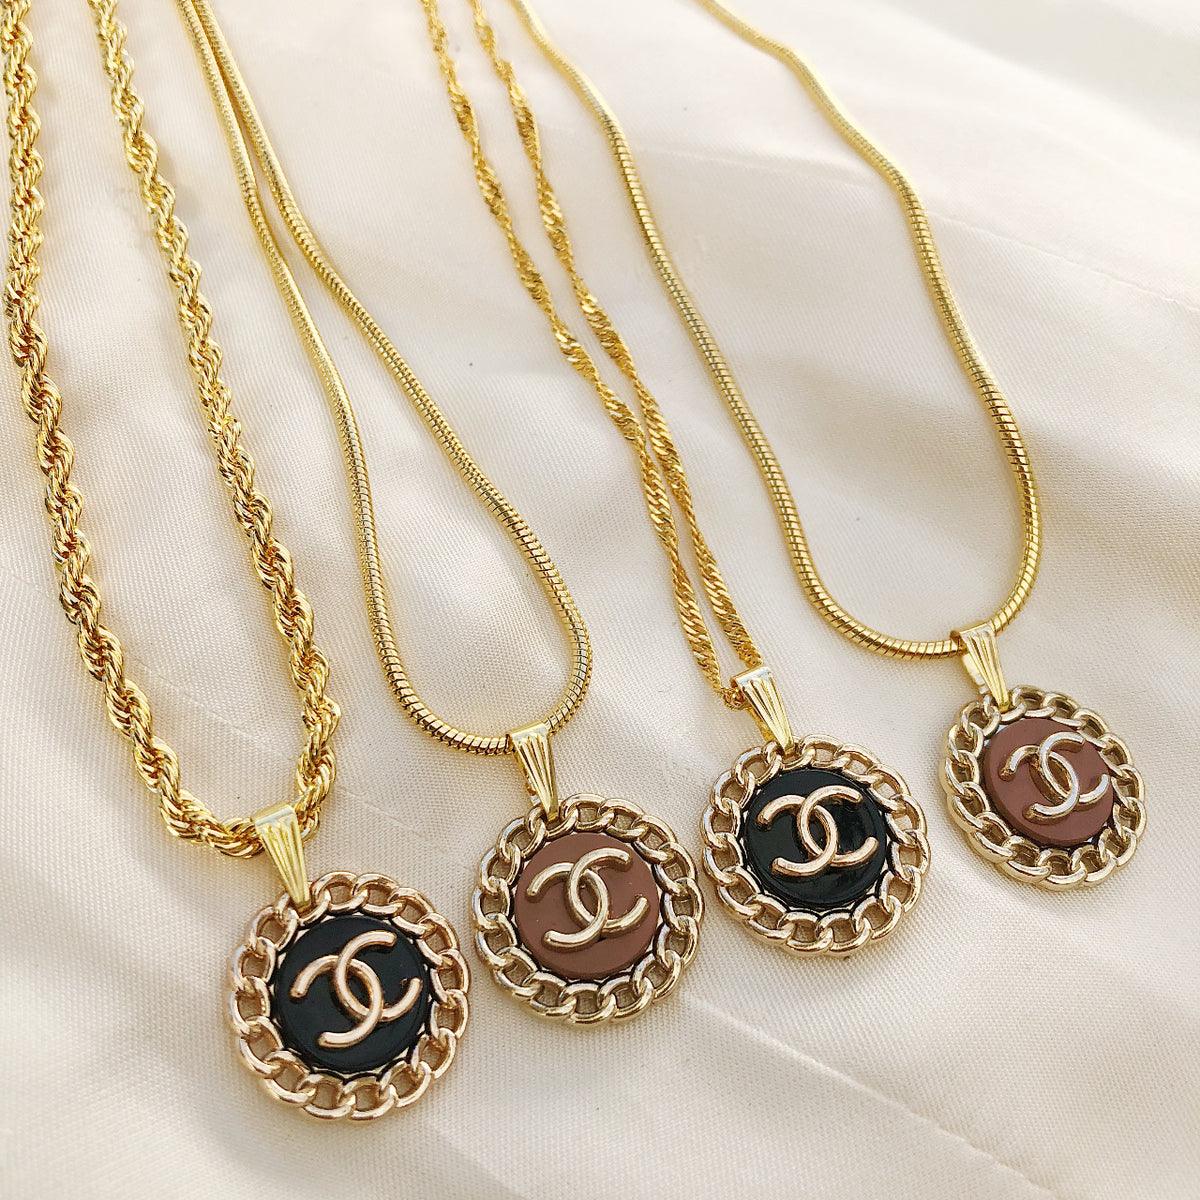 Lot - Vintage Chanel gold tone mirror pendant charm necklace with CC Logo  and chunky chain, tag marked 2 CC 9 Made in France, in Chanel bo